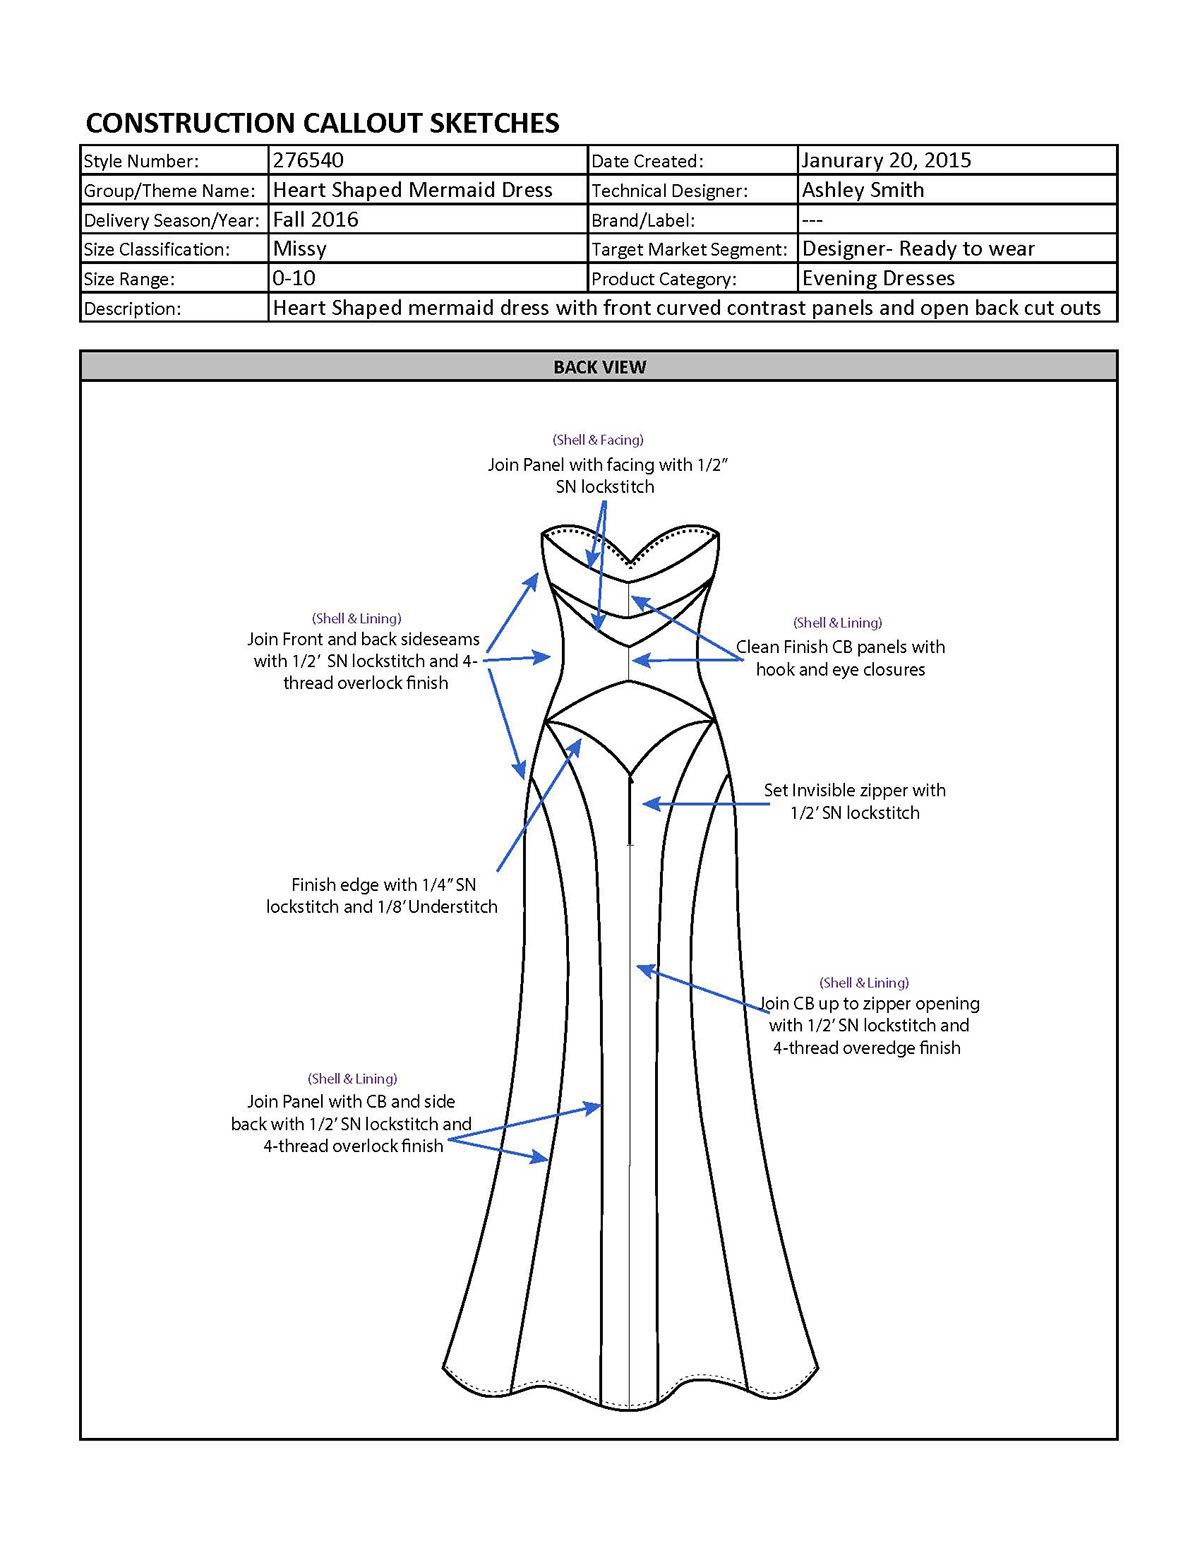 fashion design product development Technical Design Tech Pack FIDM draping sewing pattern making Drafting